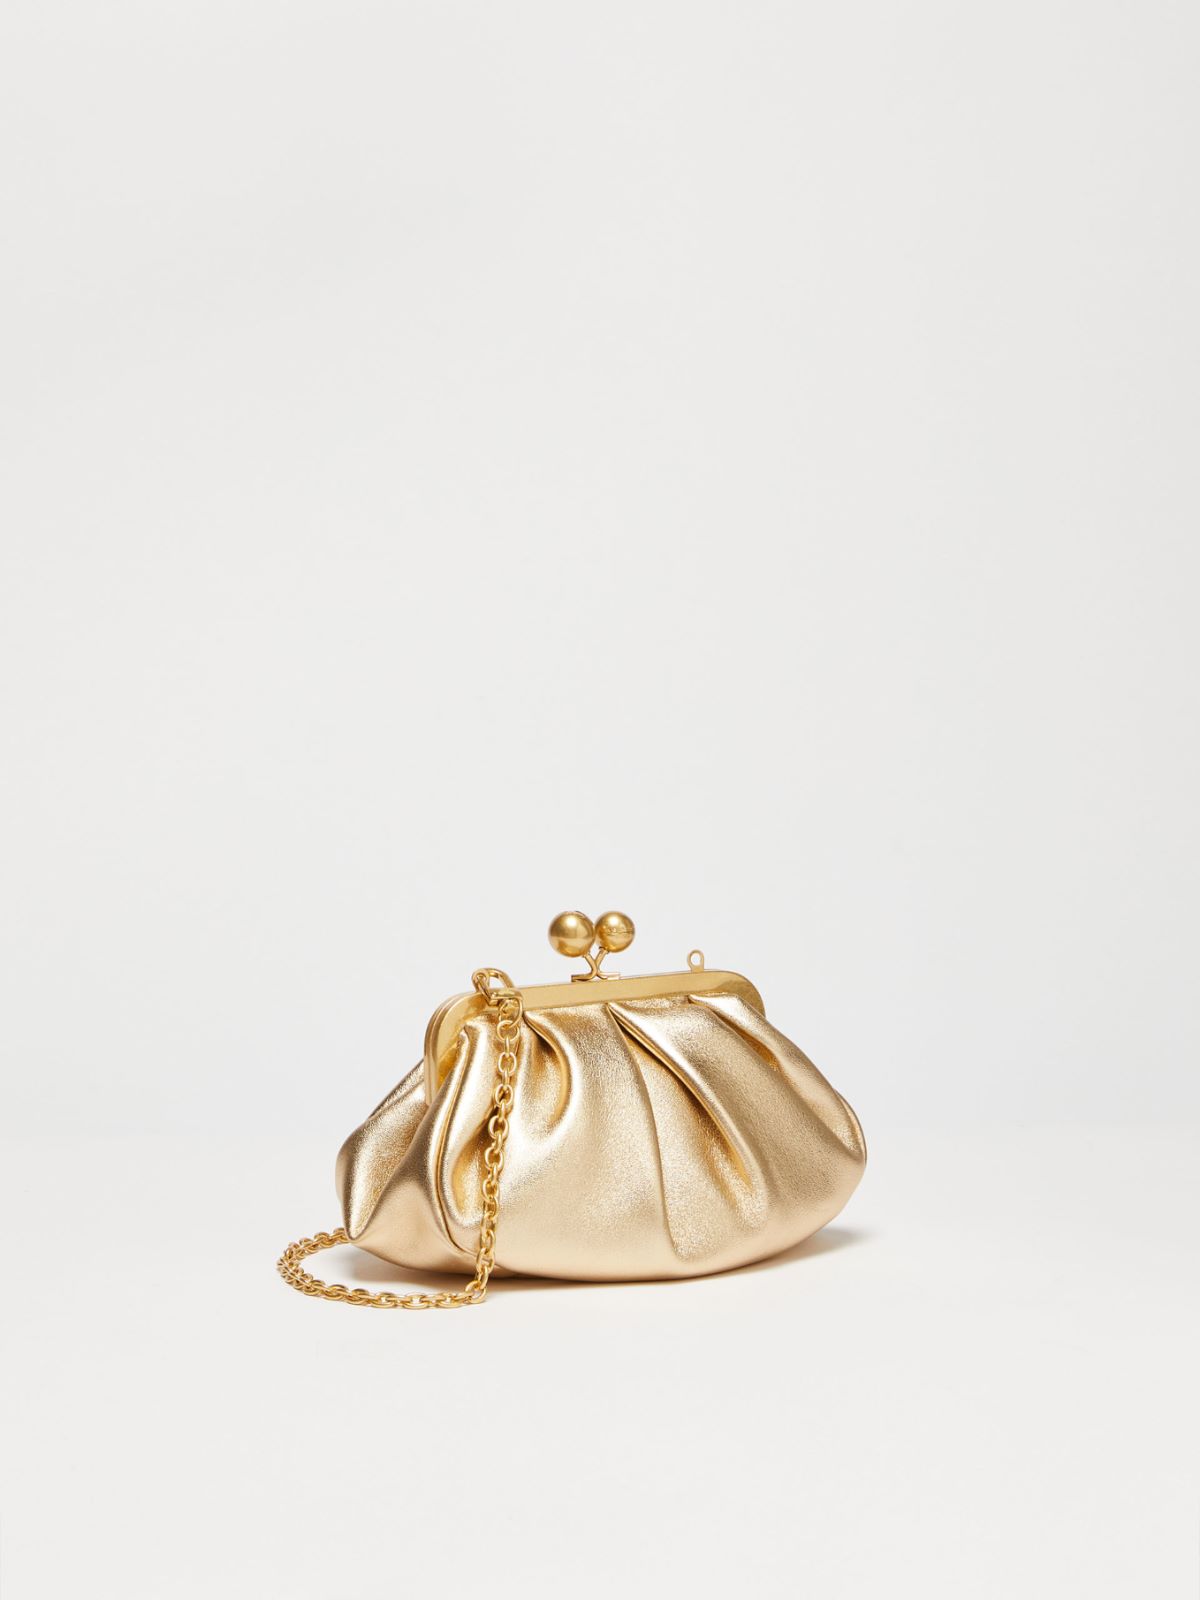 Small Pasticcino Bag in laminated nappa leather - GOLD - Weekend Max Mara - 2